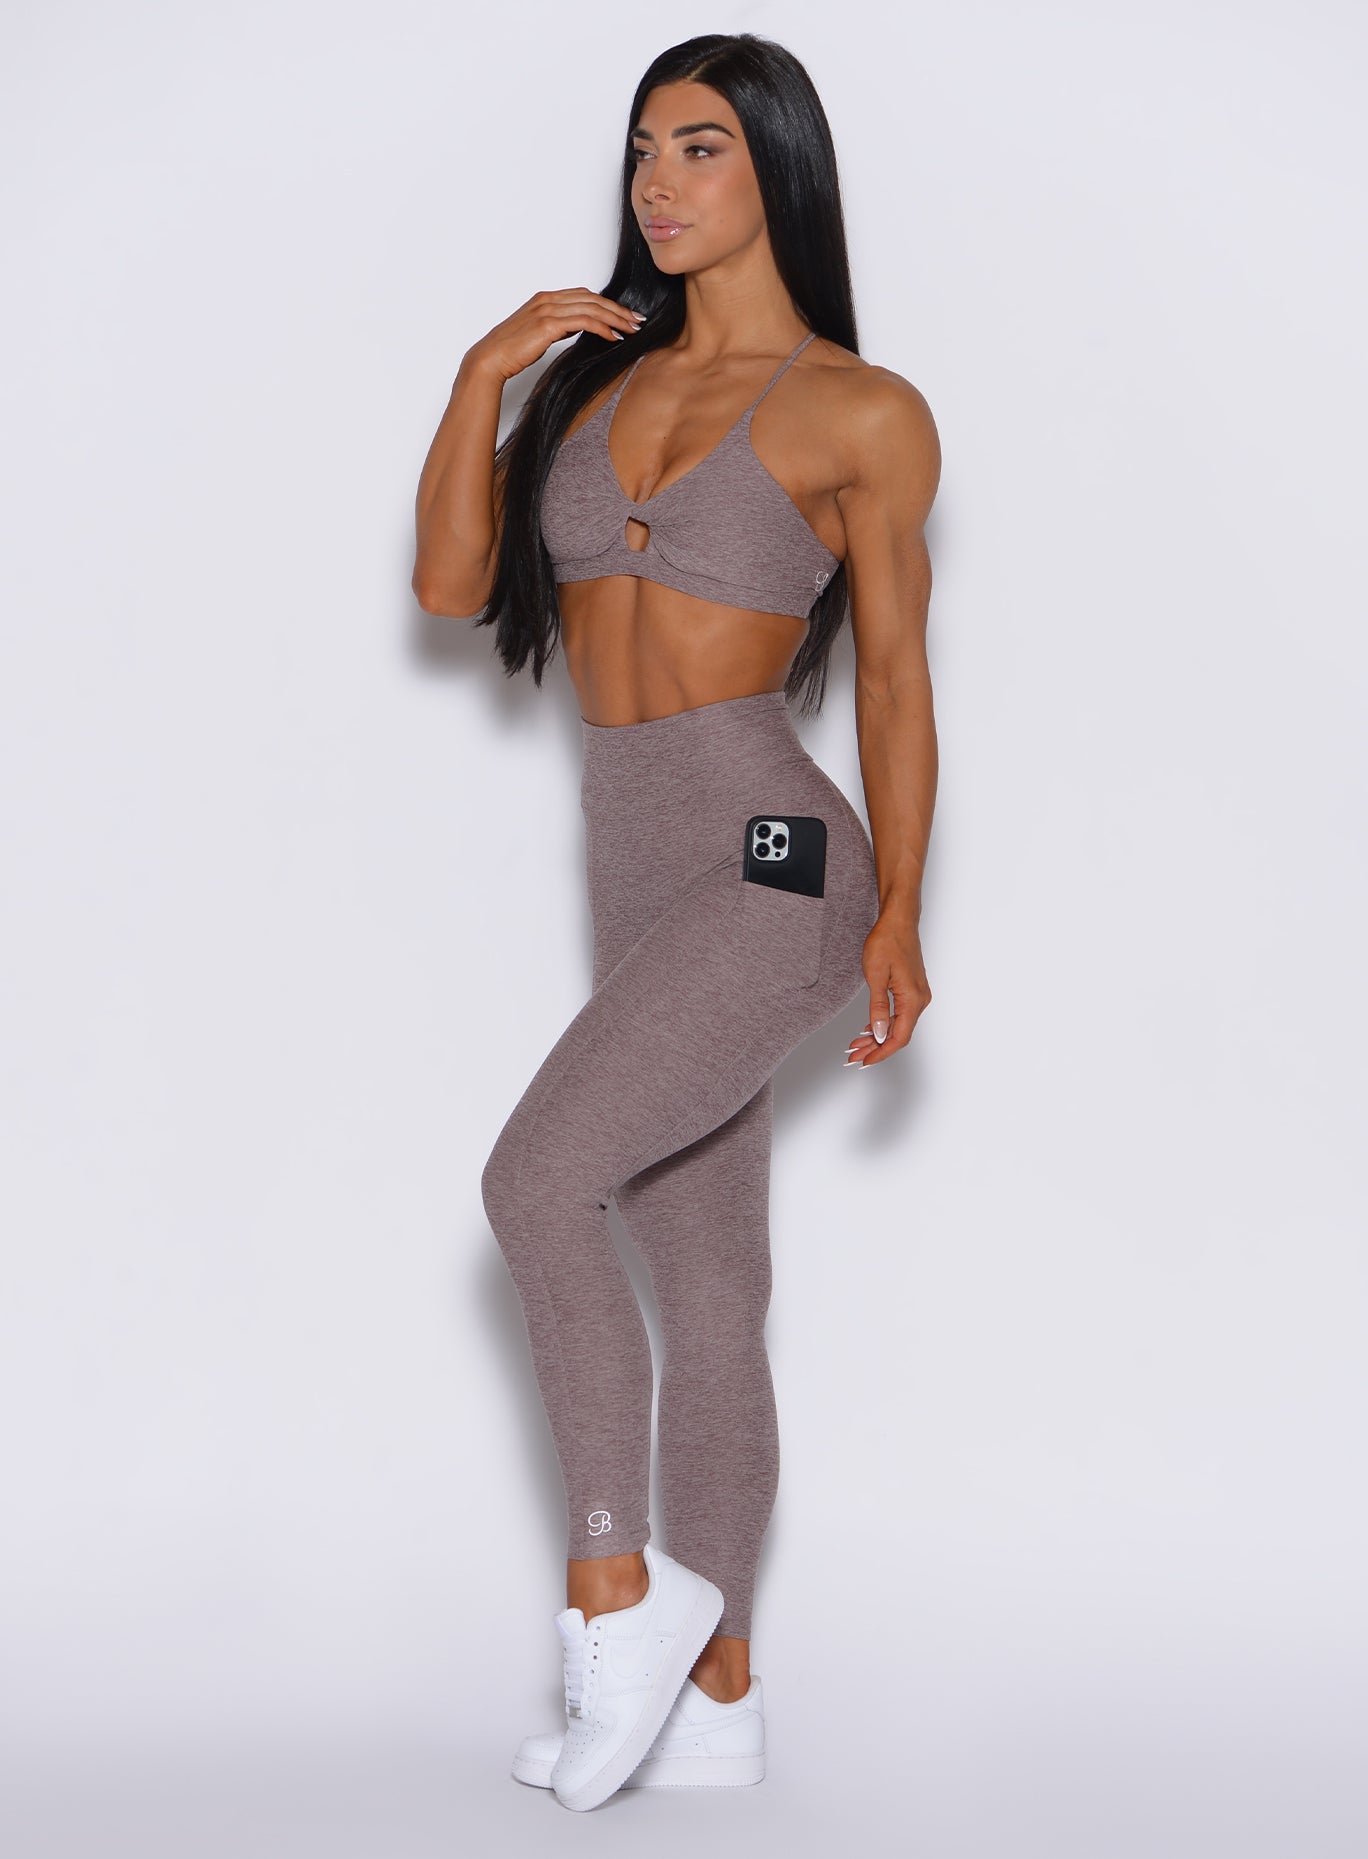 left side profile view of a model angled slightly to her left wearing our curves leggings in london fog color along with the matching sports bra 